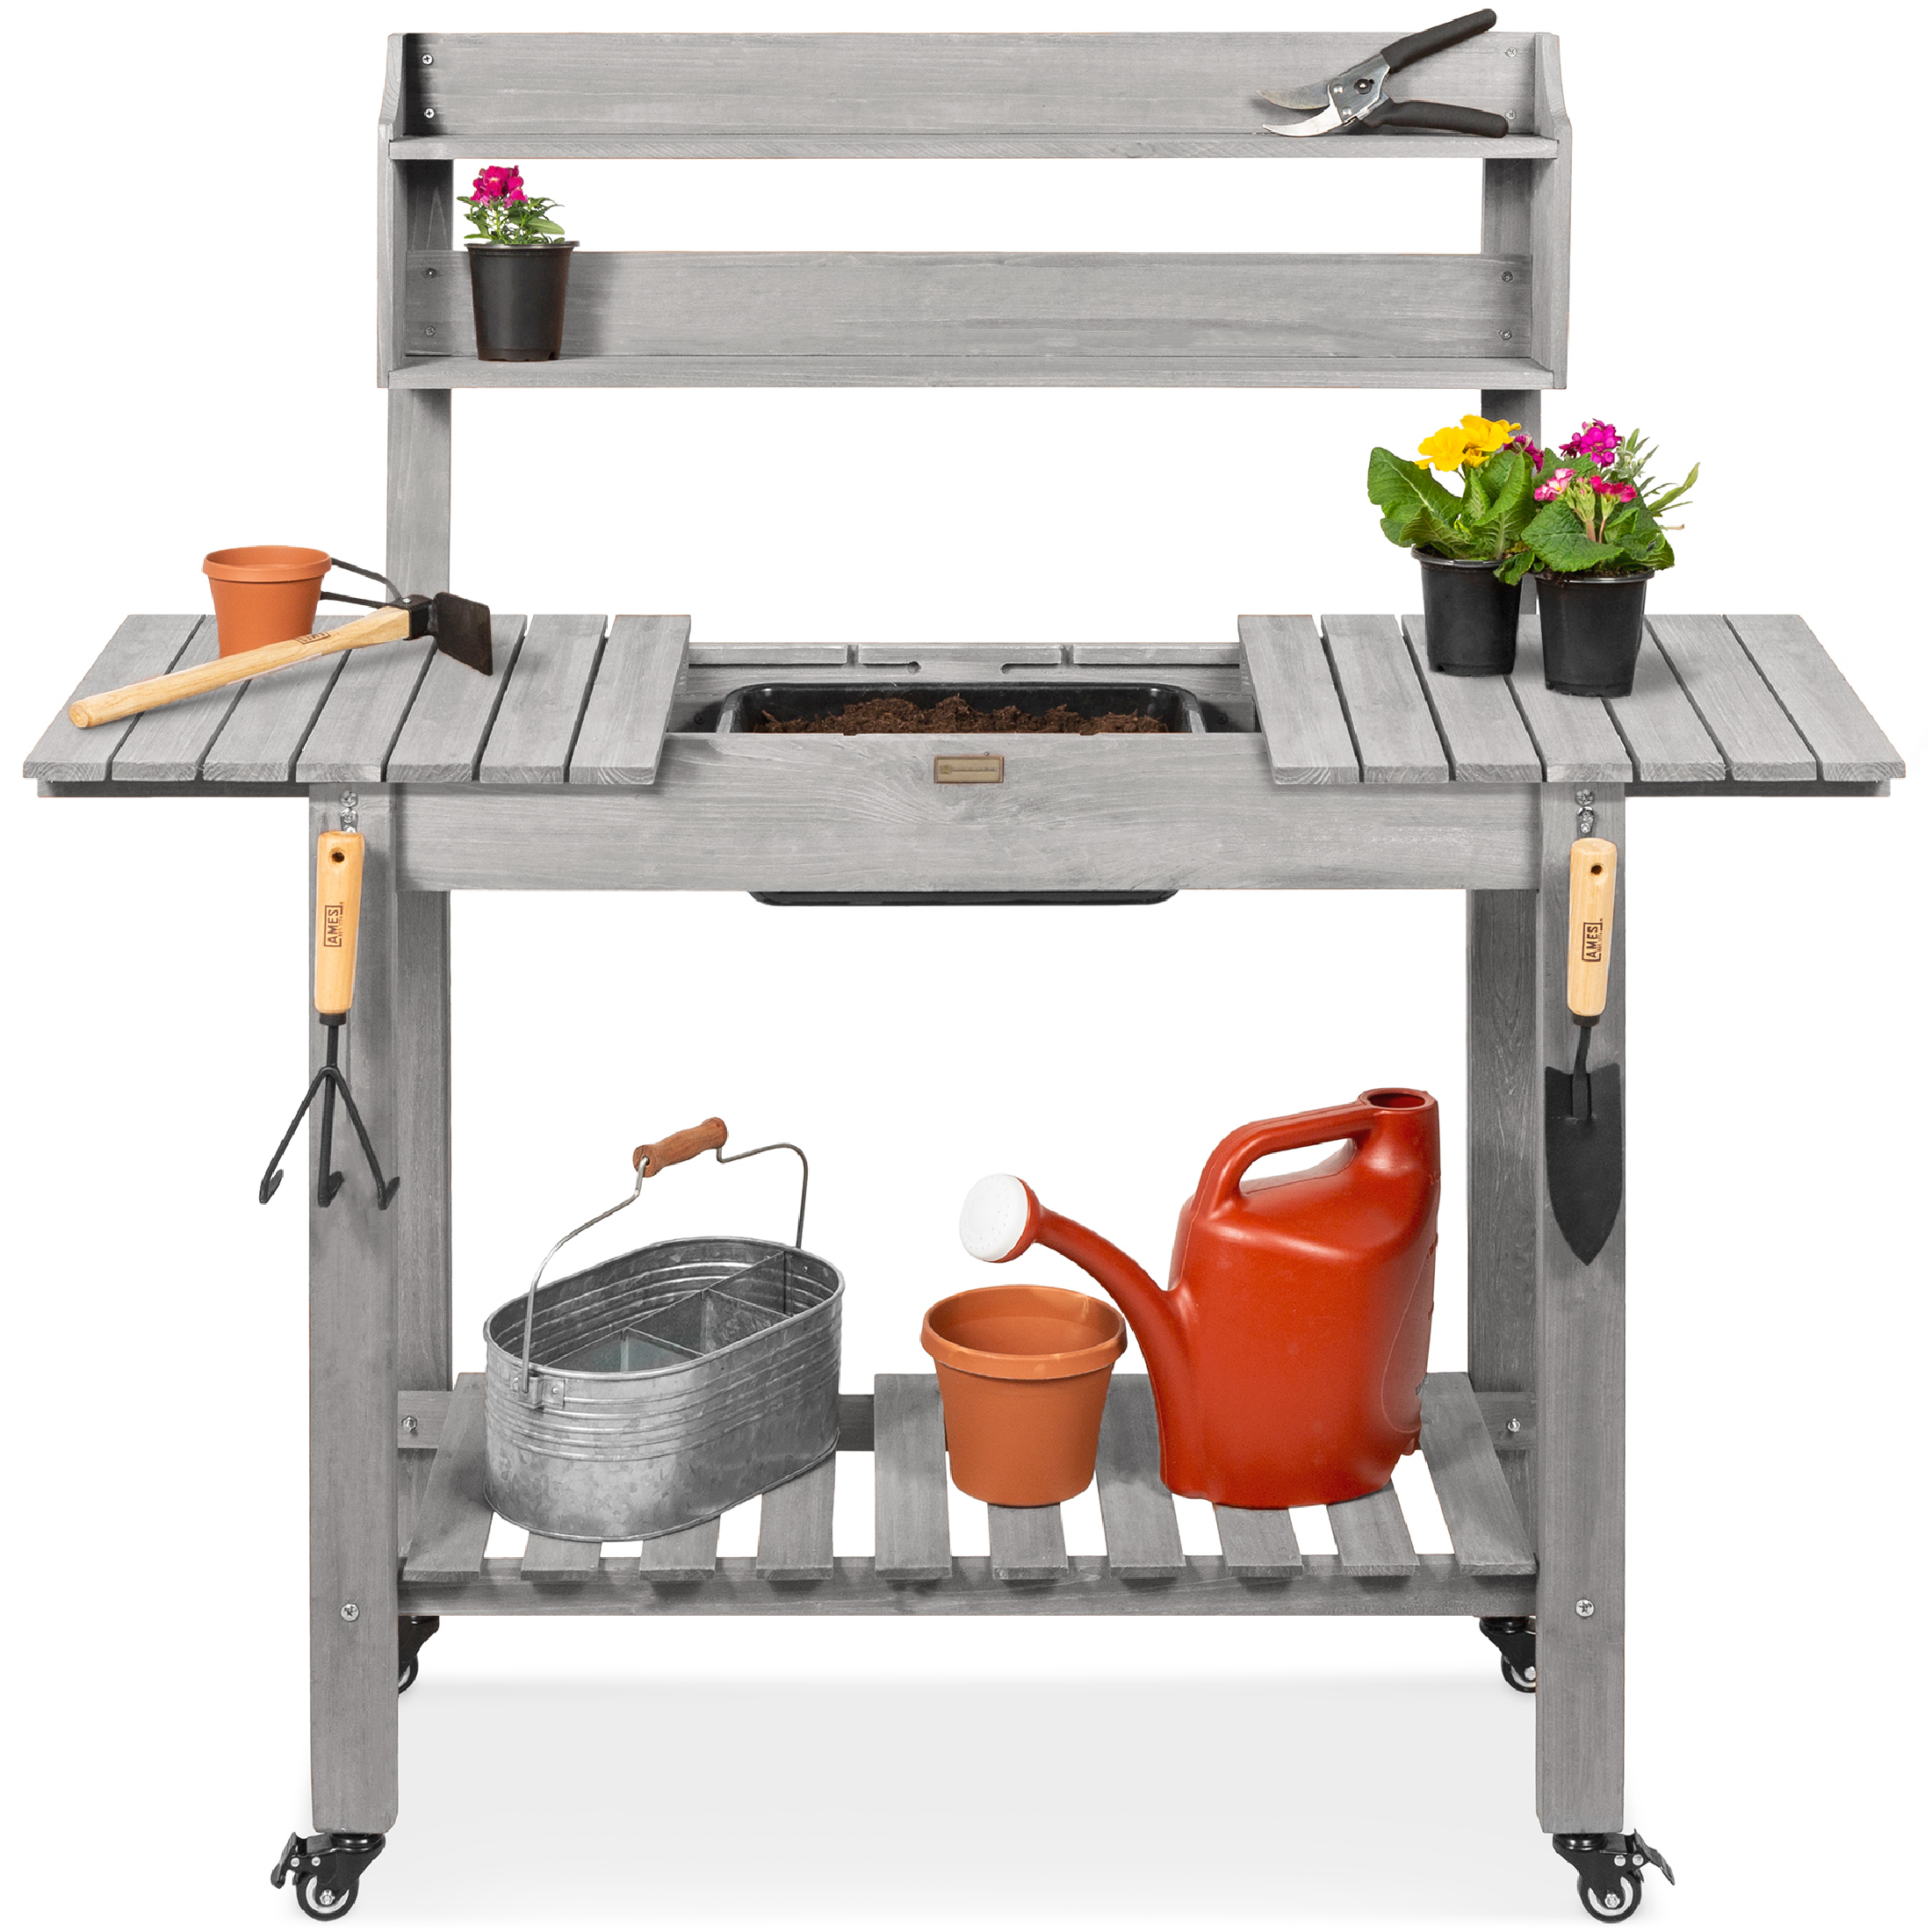 Best Choice Products Wood Garden Potting Bench Workstation Table w/ Sliding Tabletop, 4 Locking Wheels, Dry Sink - Gray - image 1 of 8